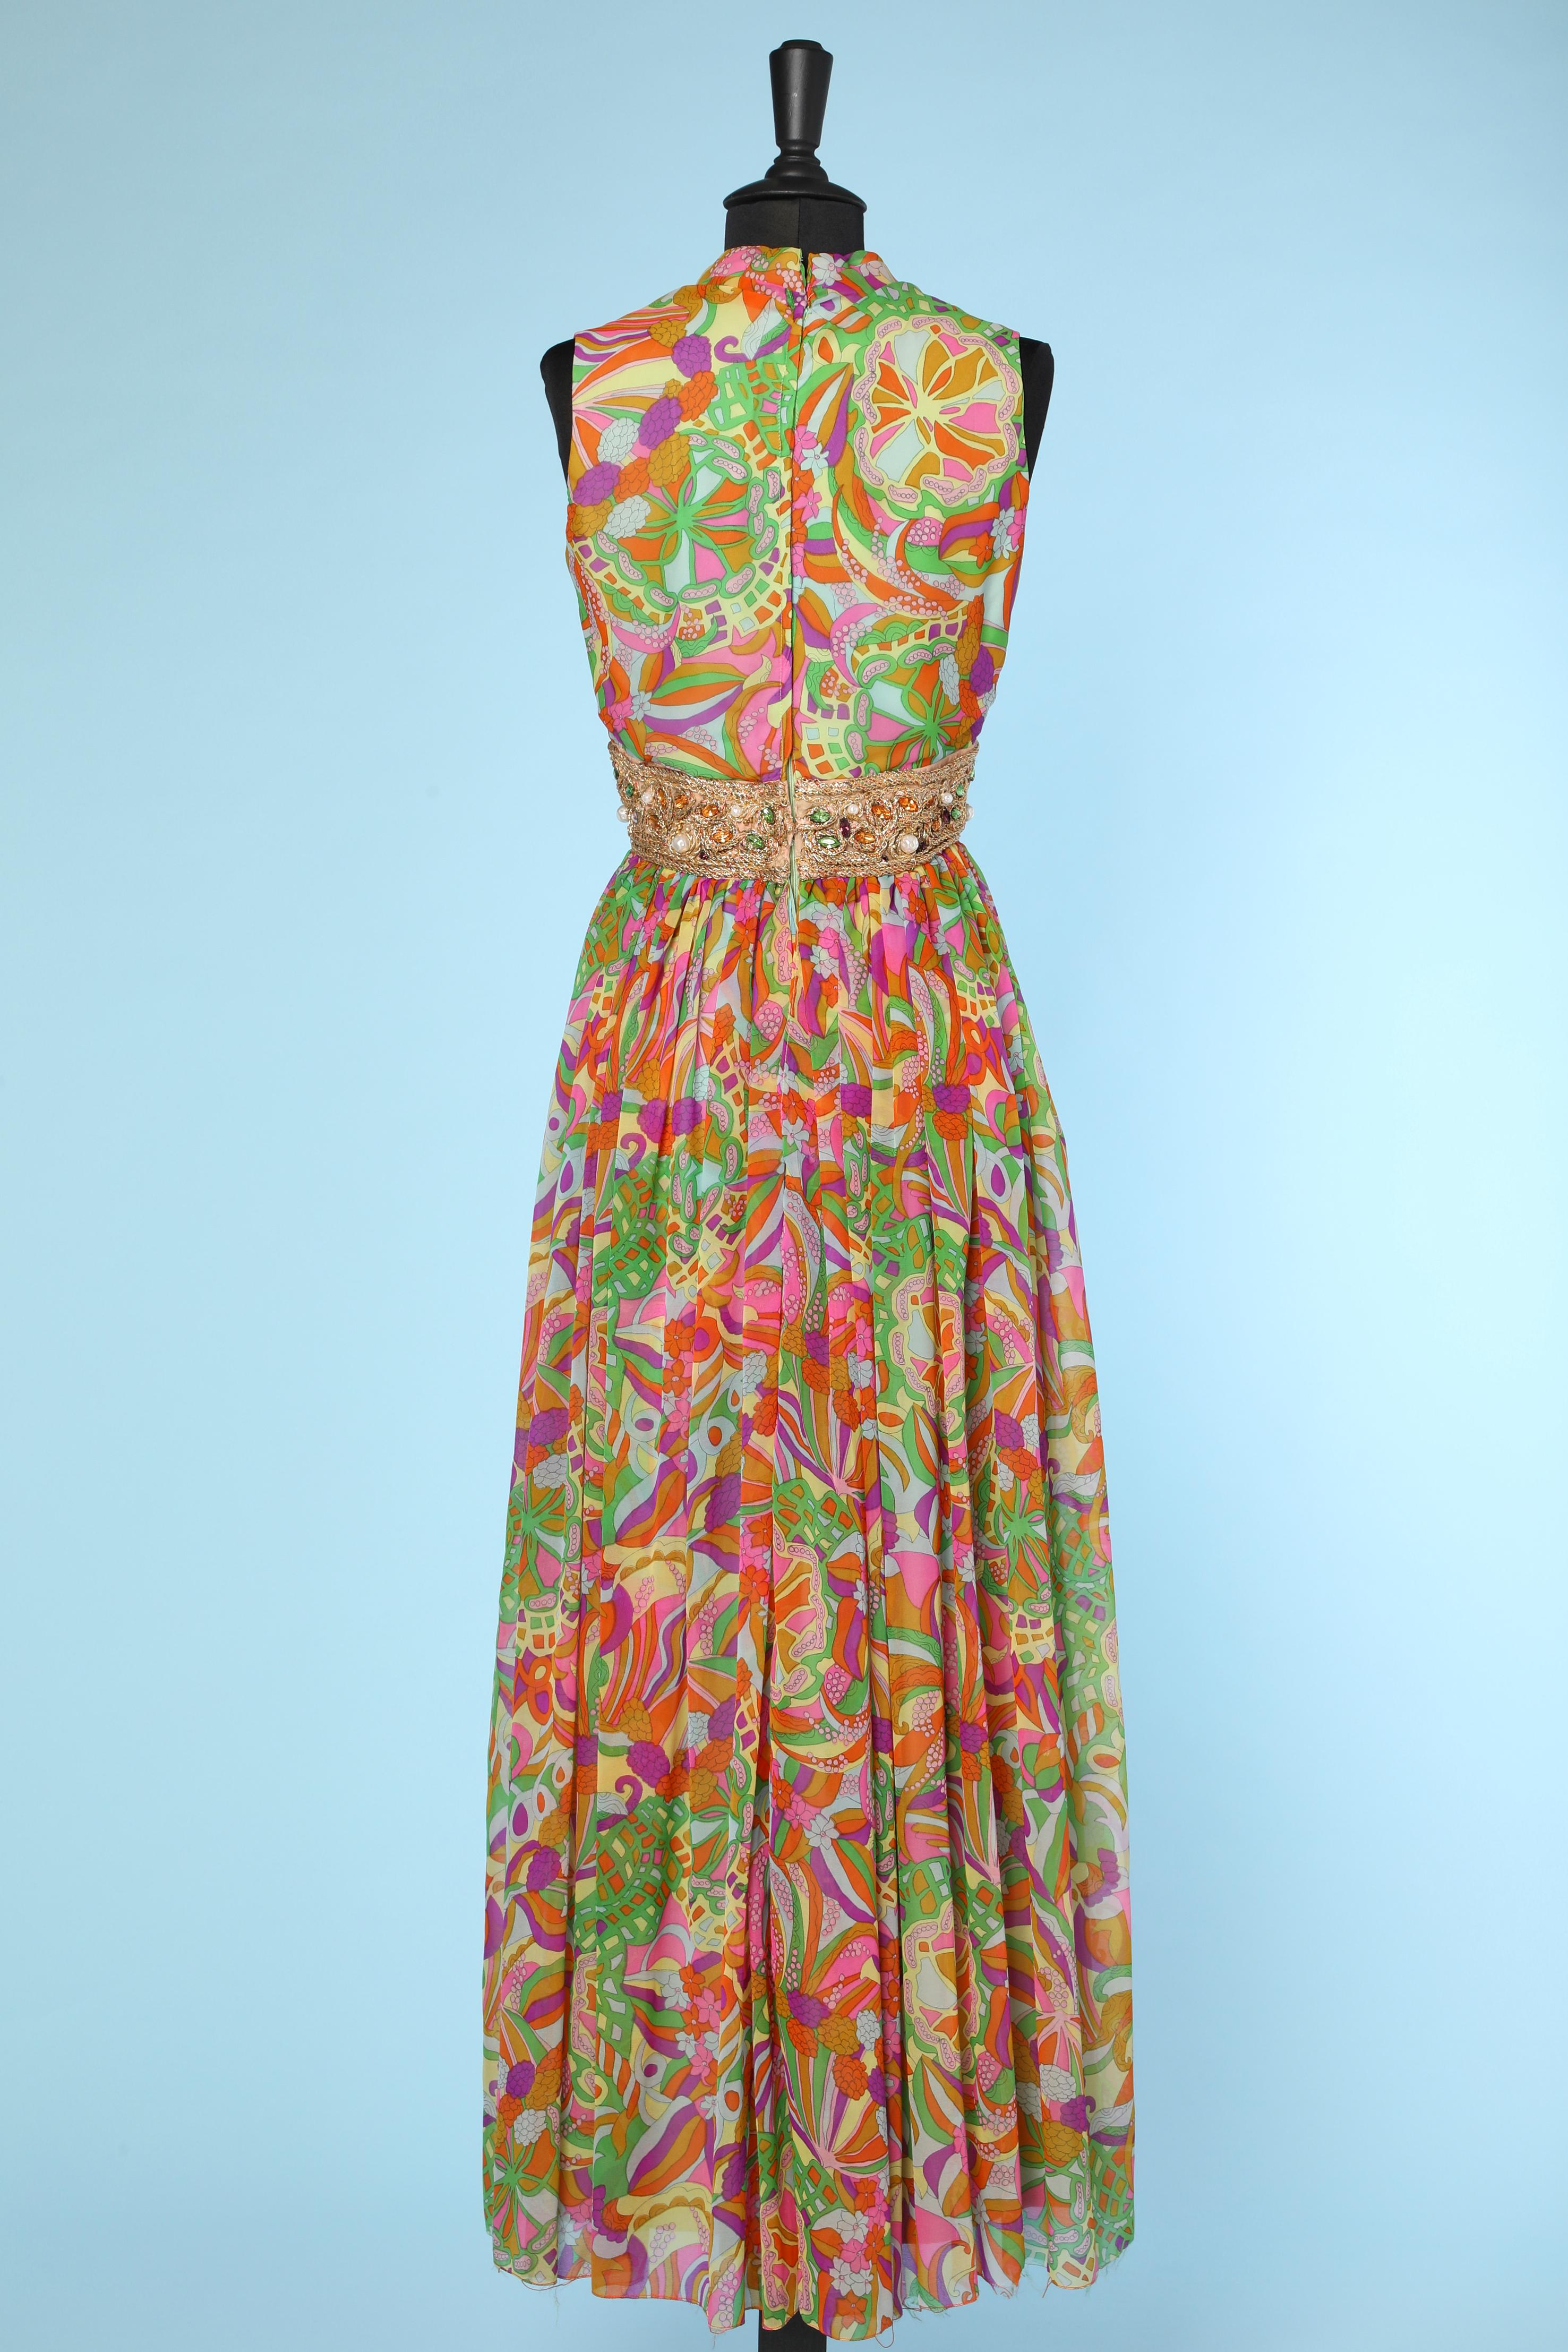 Long evening psychedelic printed dress Bullock's Wilshire 1